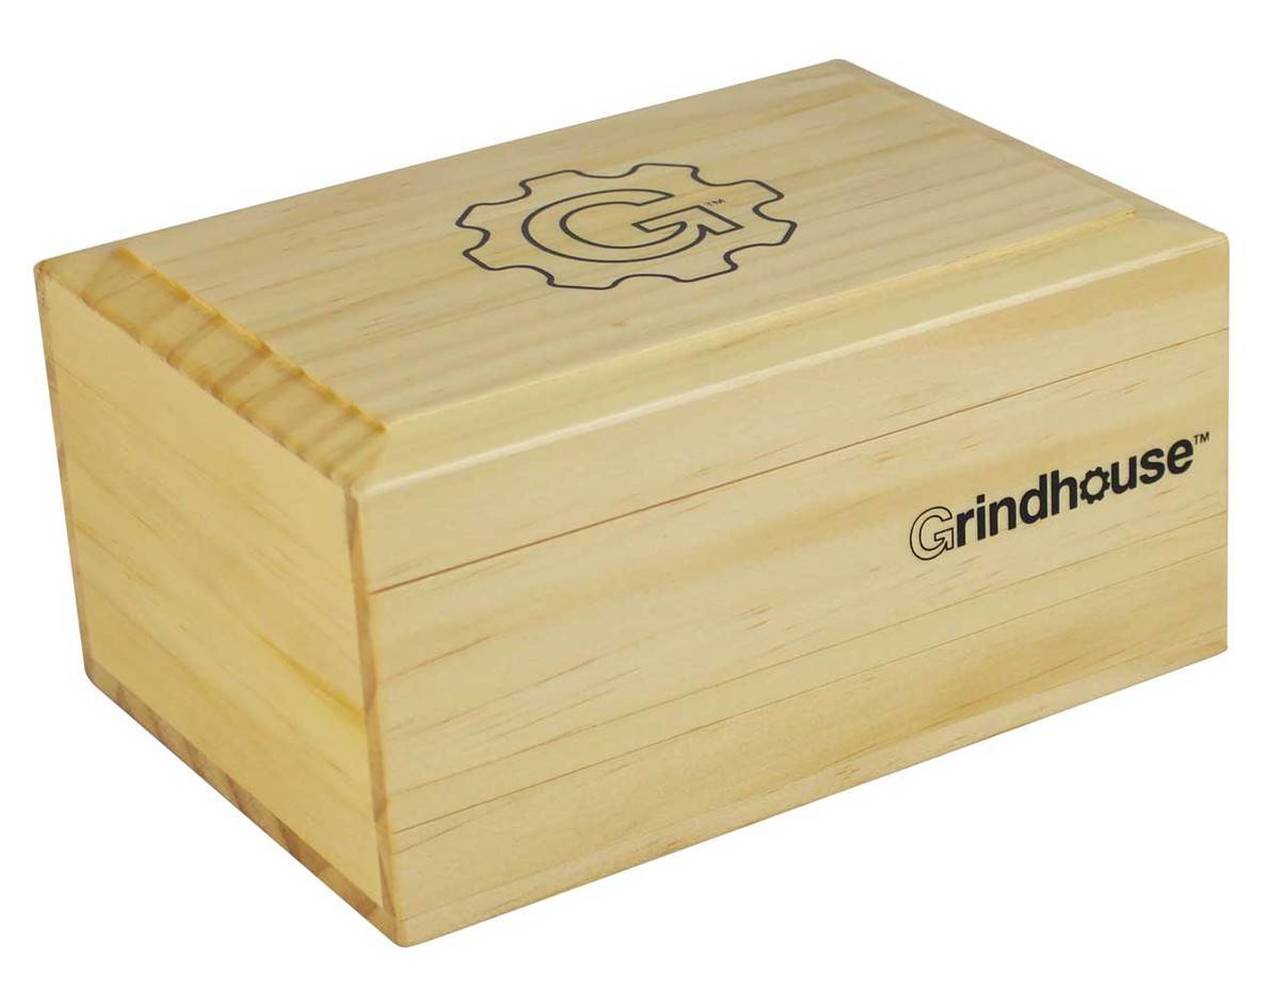 Grindhouse - Pine Sifter Box & Rolling Tray | bobhq